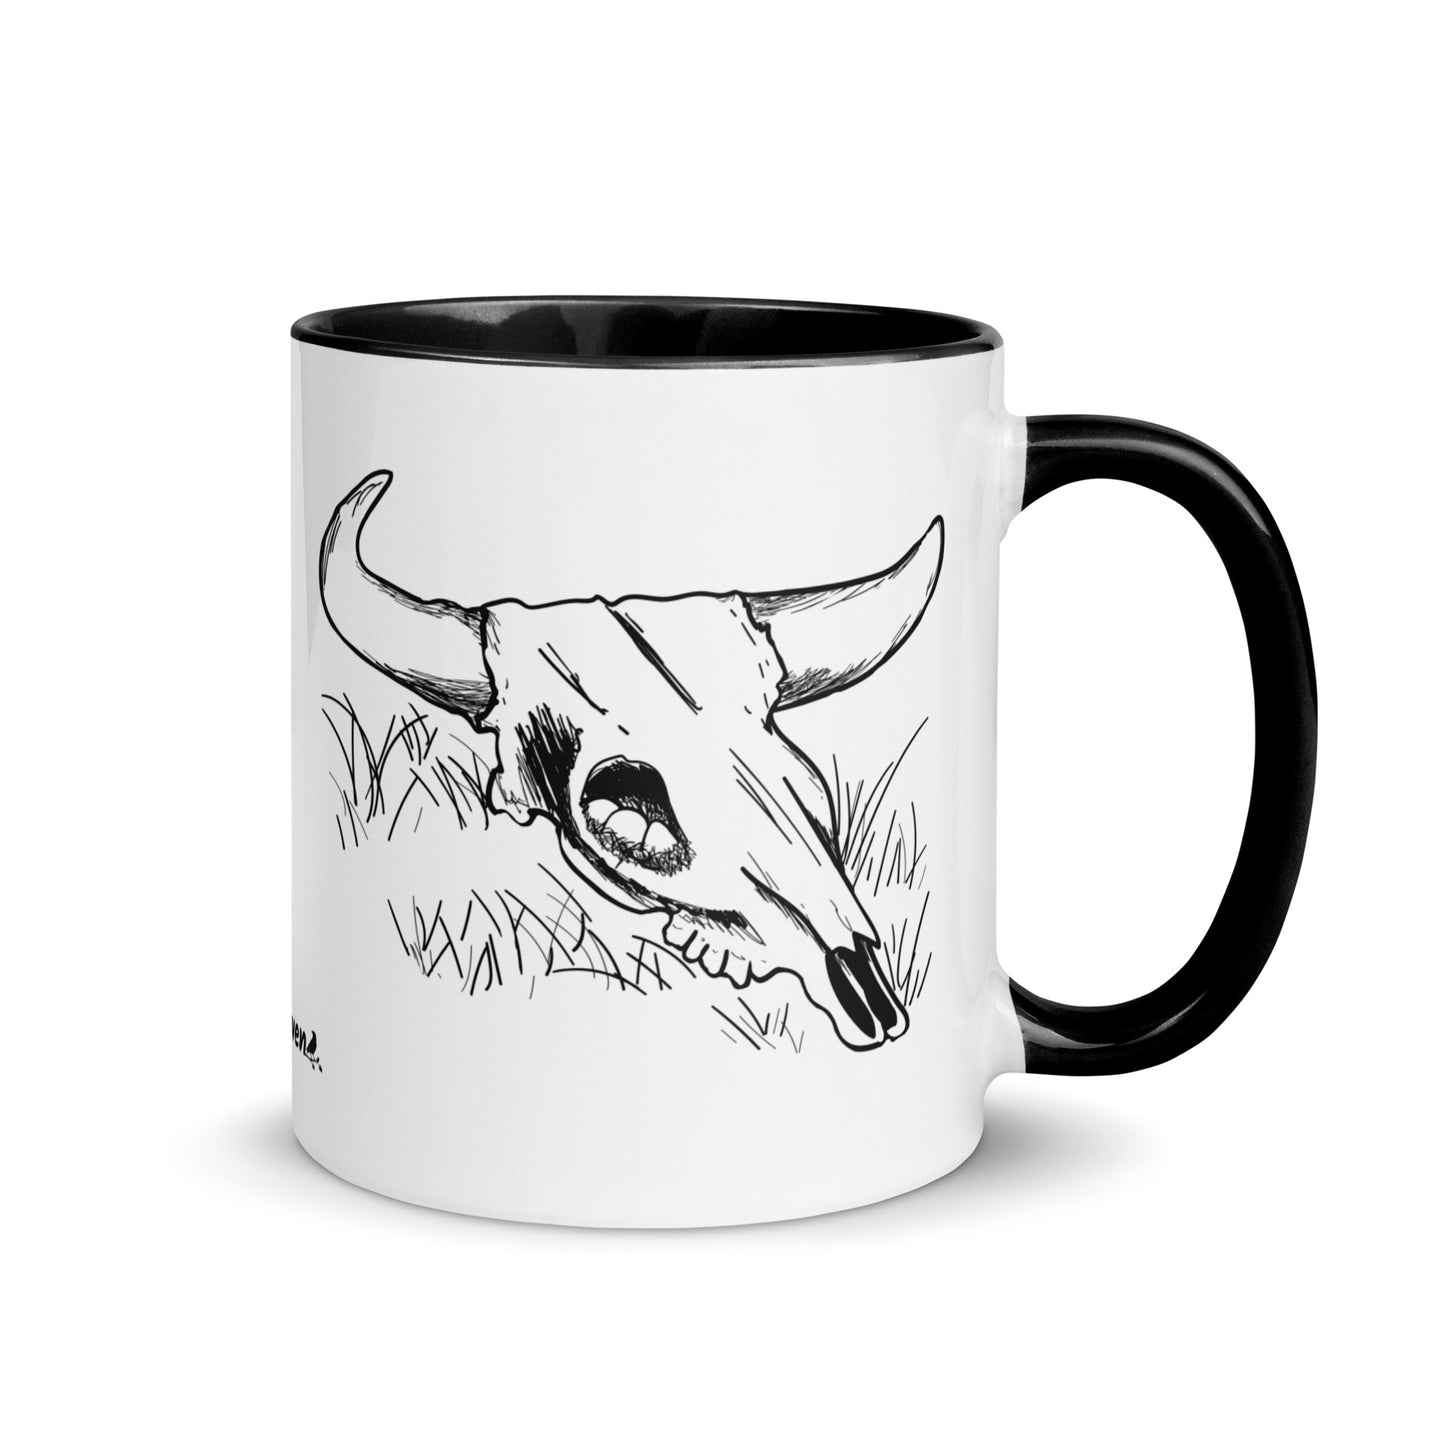 11 ounce ceramic mug. White with black handle and inside. Features double sided image of a cow skull cradling a bird nest.